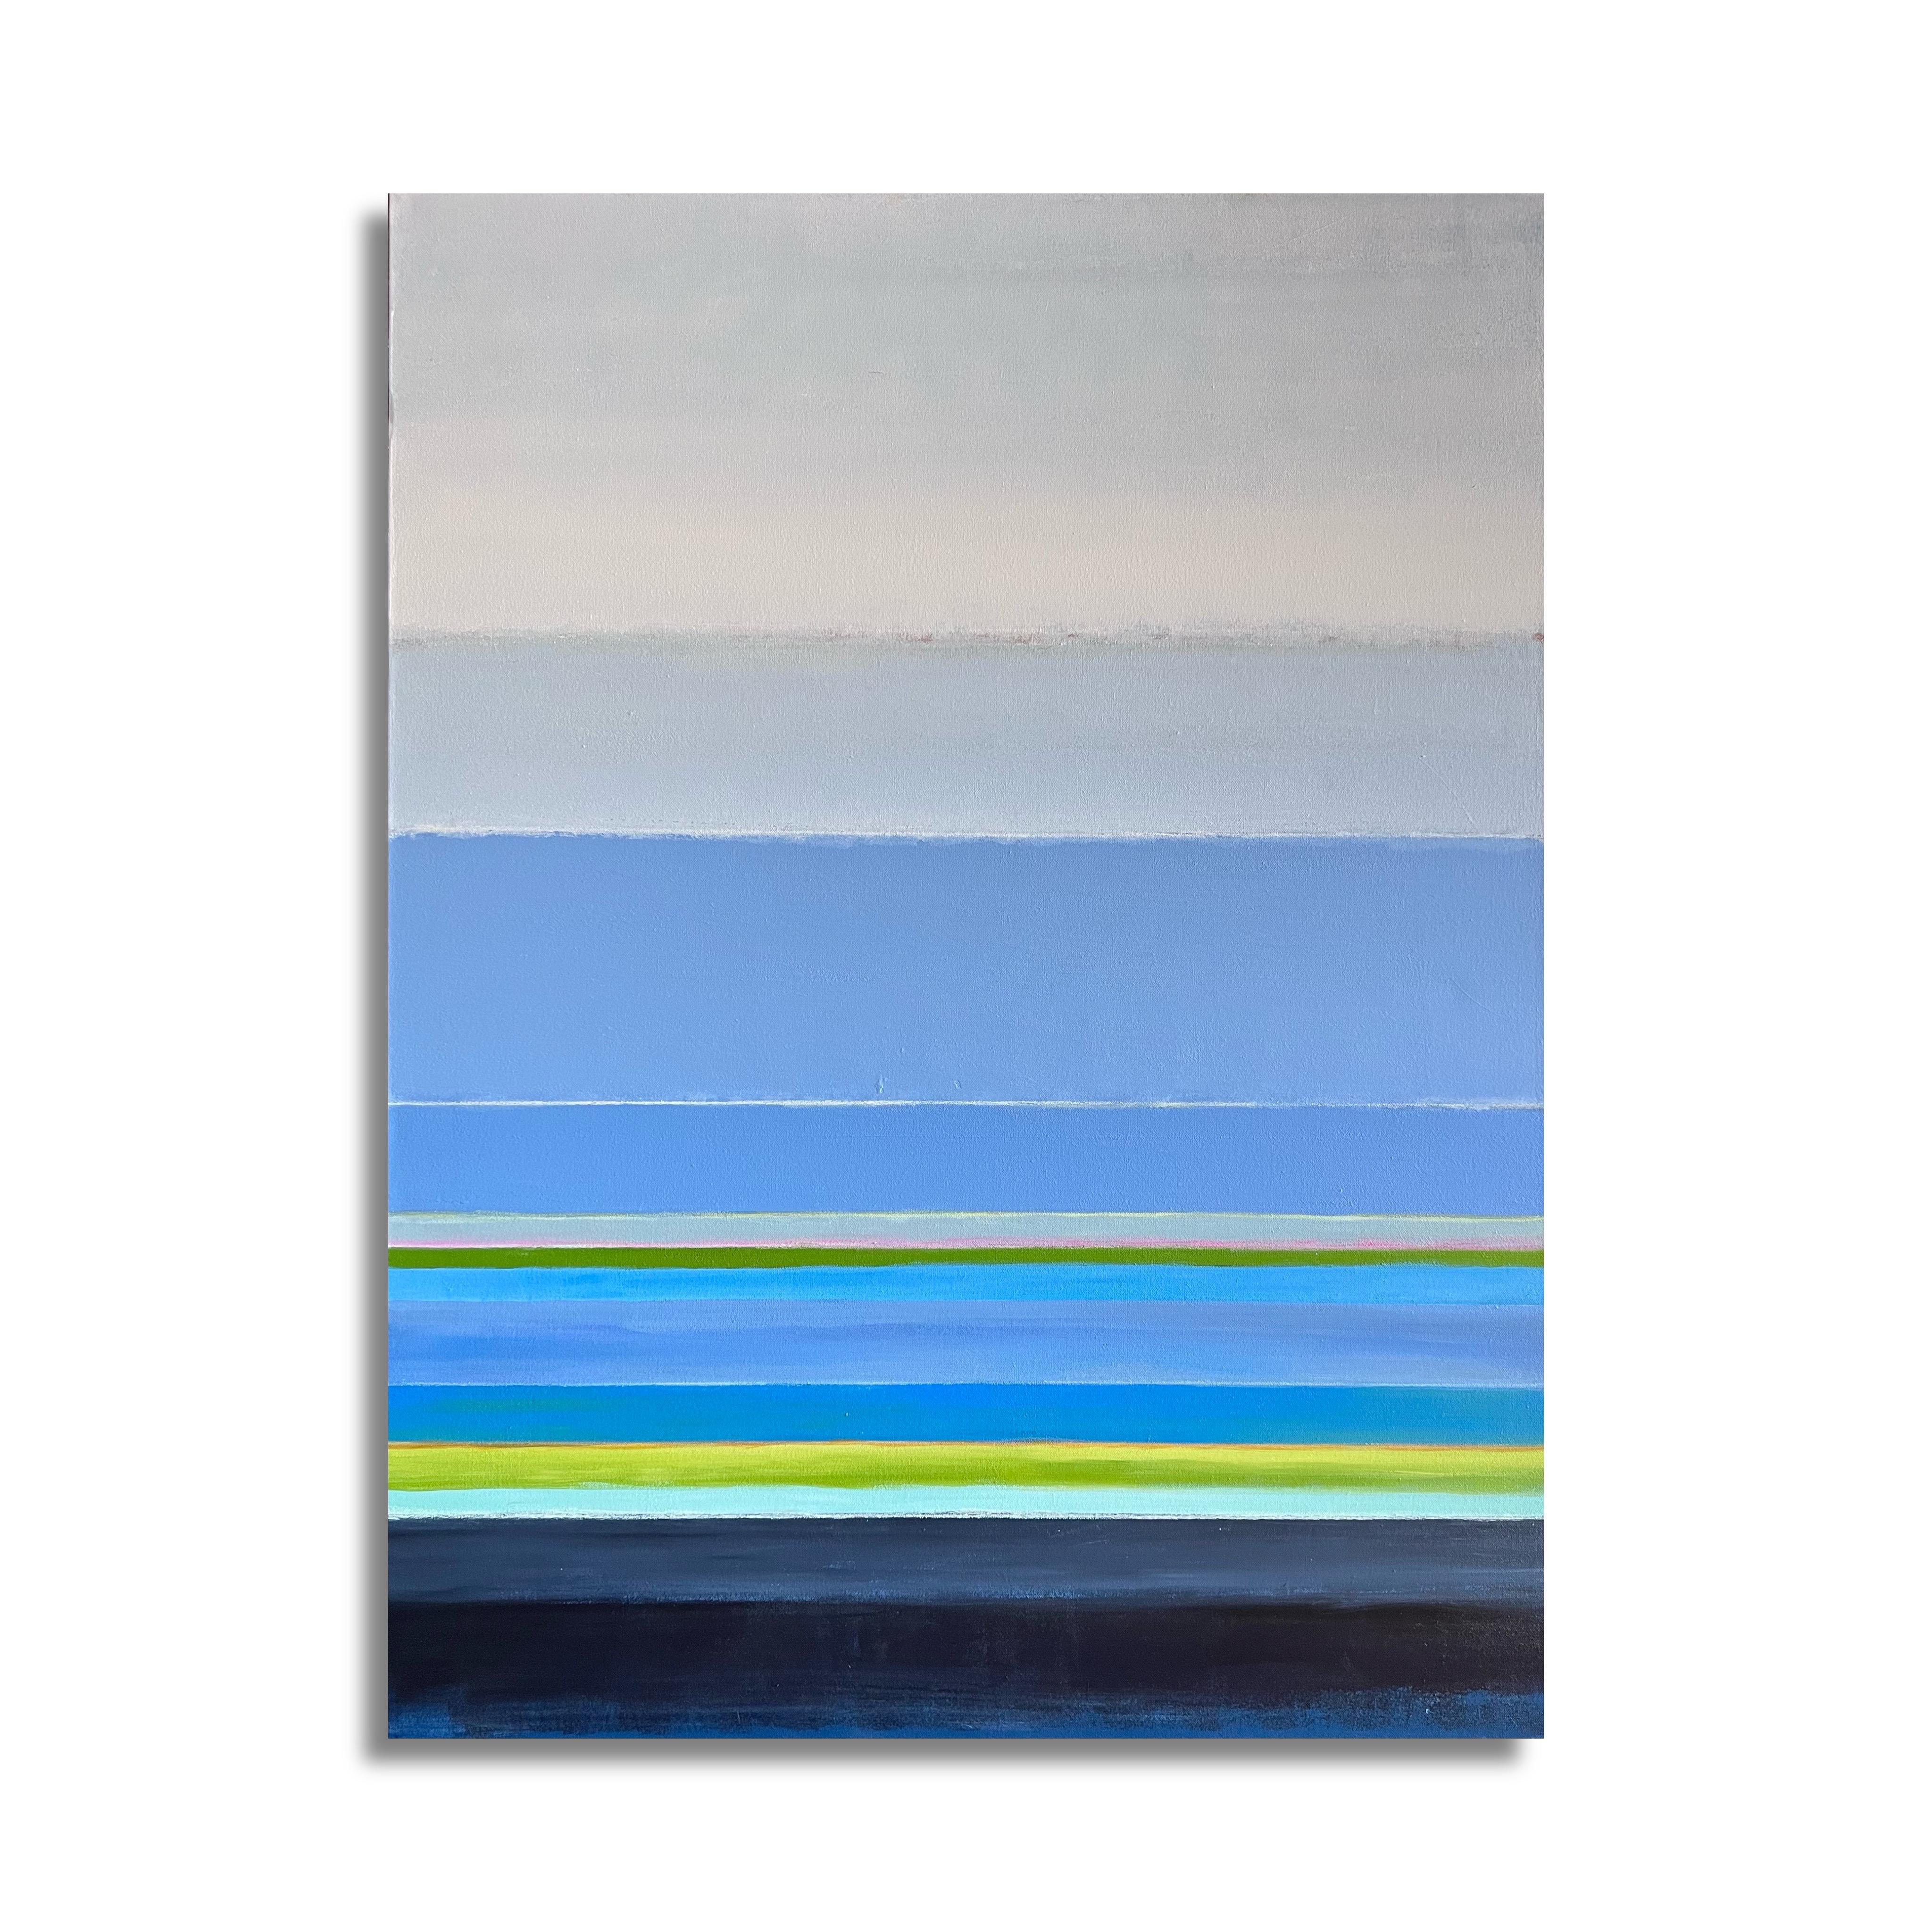 Of the Same Stripe (Abstract, Geometric, Pattern, Waterscape, Skyscape, Blue) - Contemporary Painting by Kelley Carman